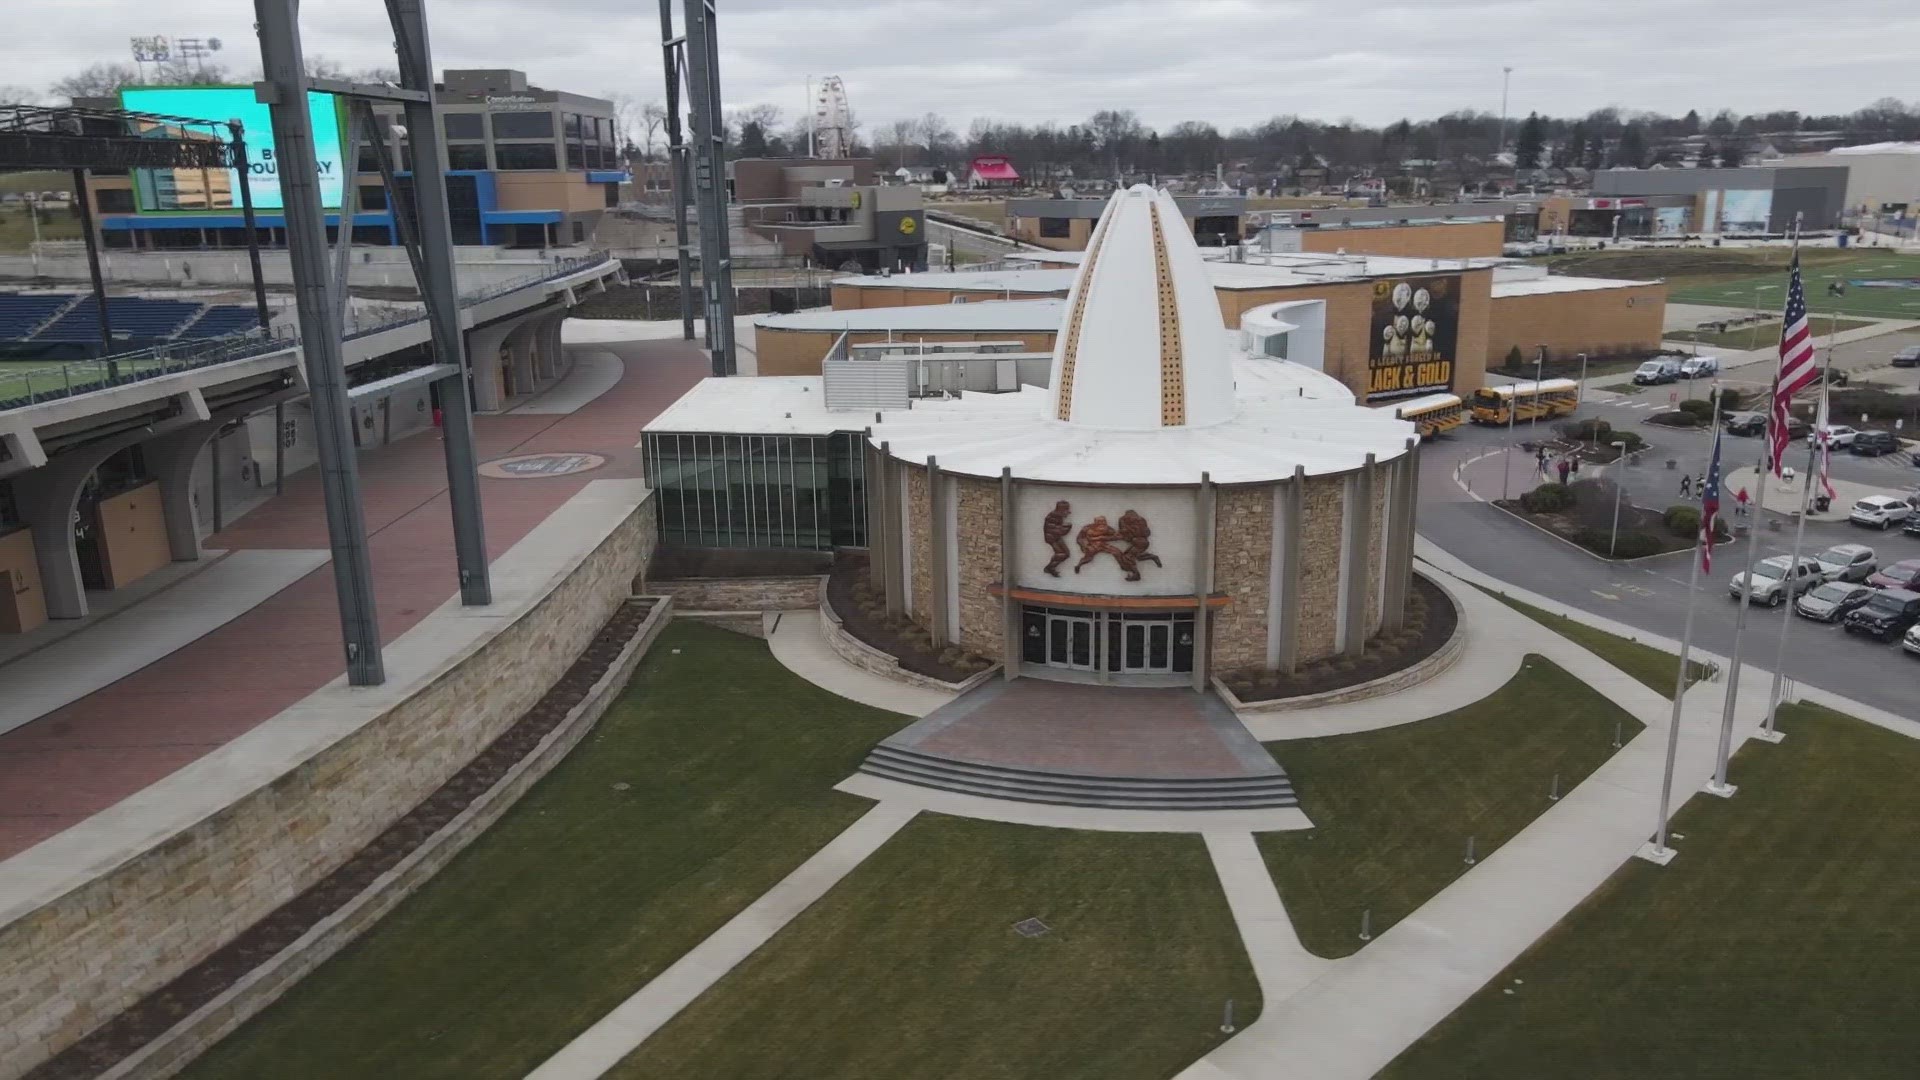 In its 60-plus-year history, the Pro Football Hall of Fame in Canton has seen expansions, but nothing quite like the makeover that's coming.